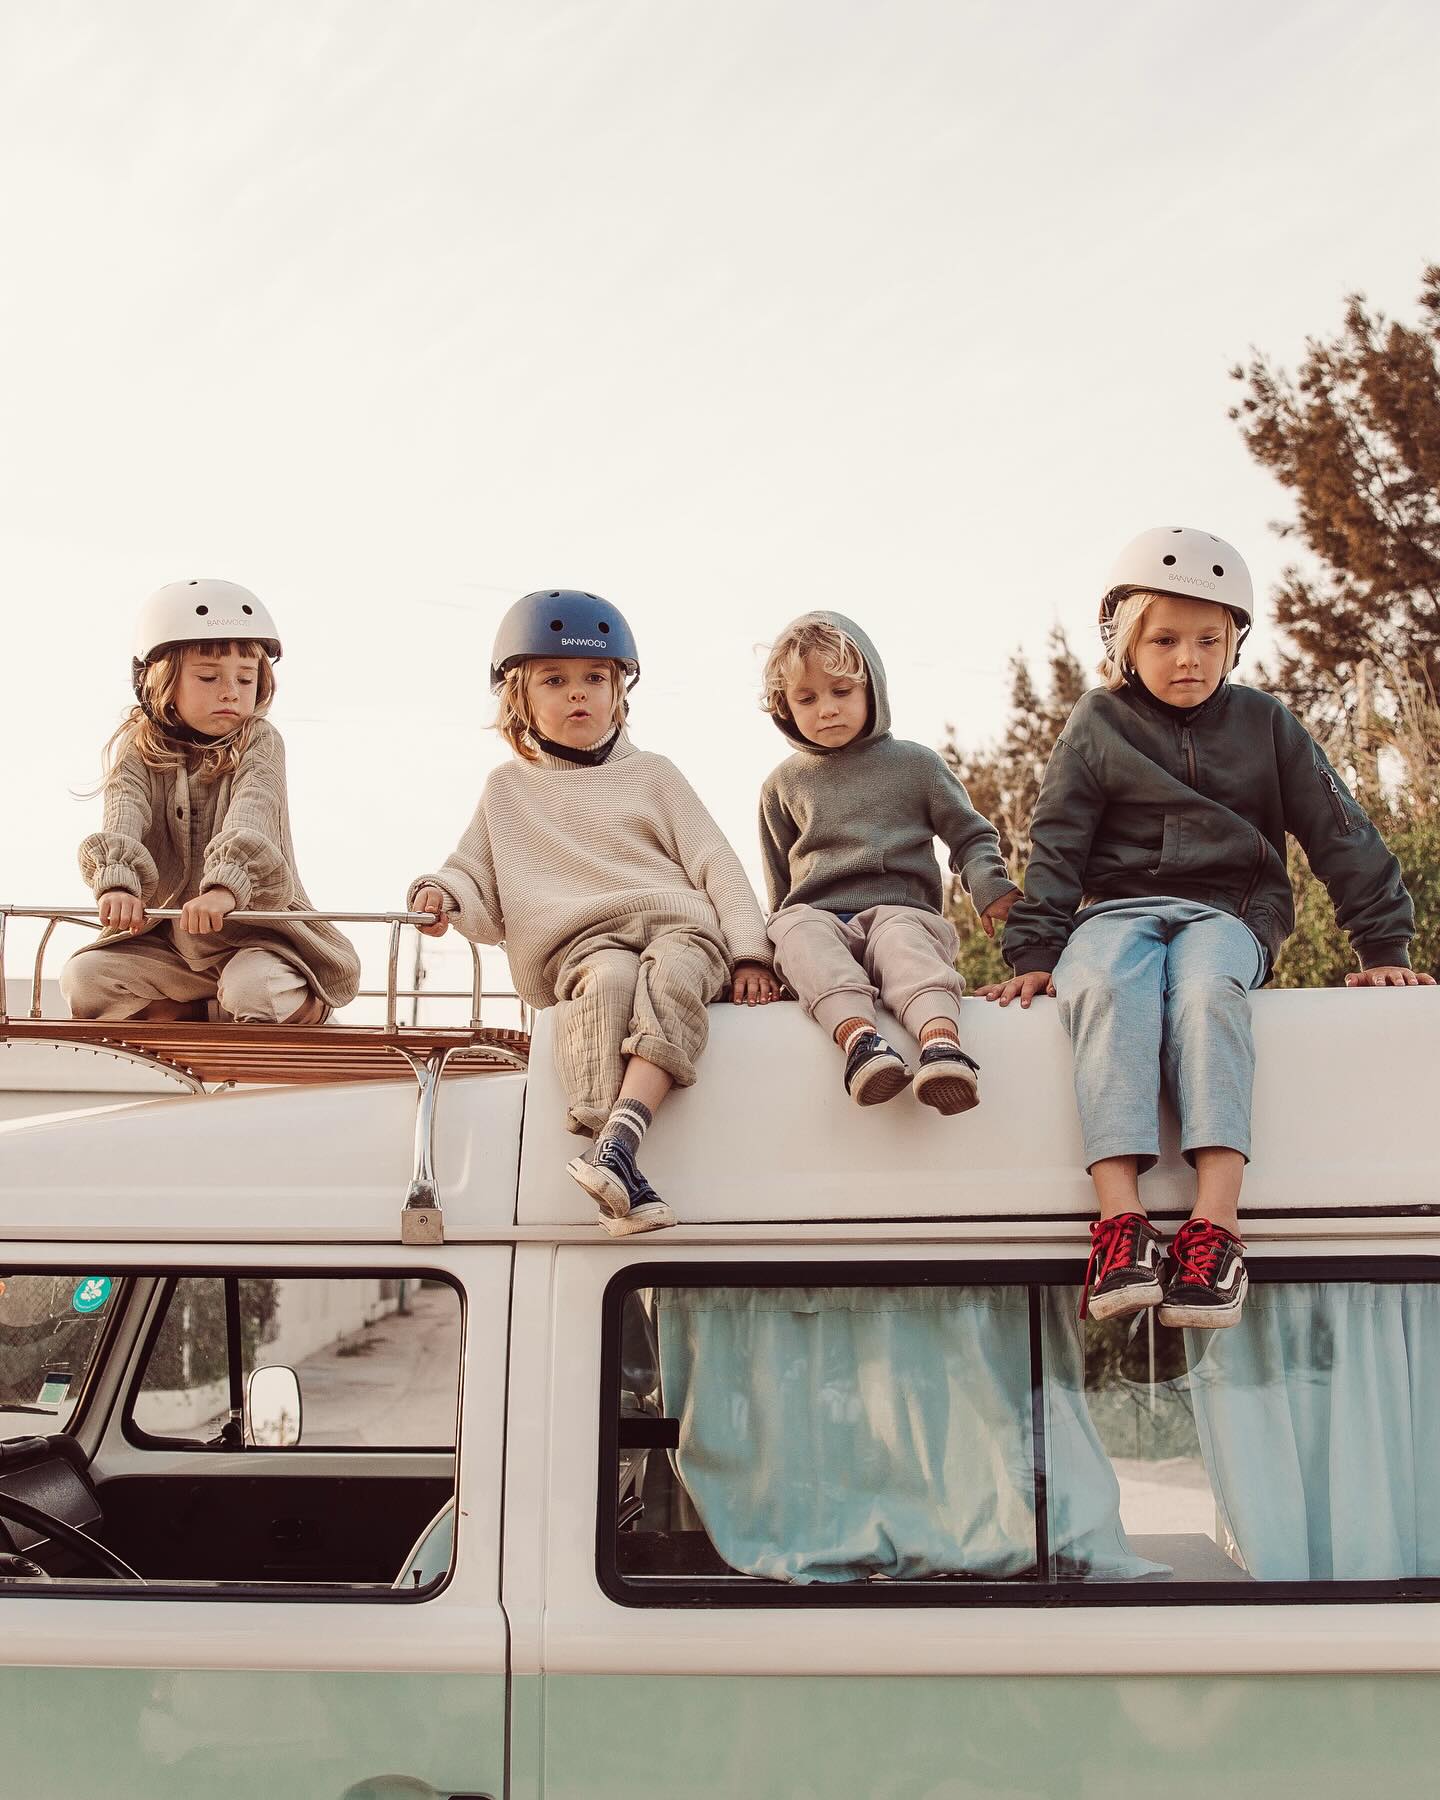 Van-life on topDiscover all our helmets at #banwood.com